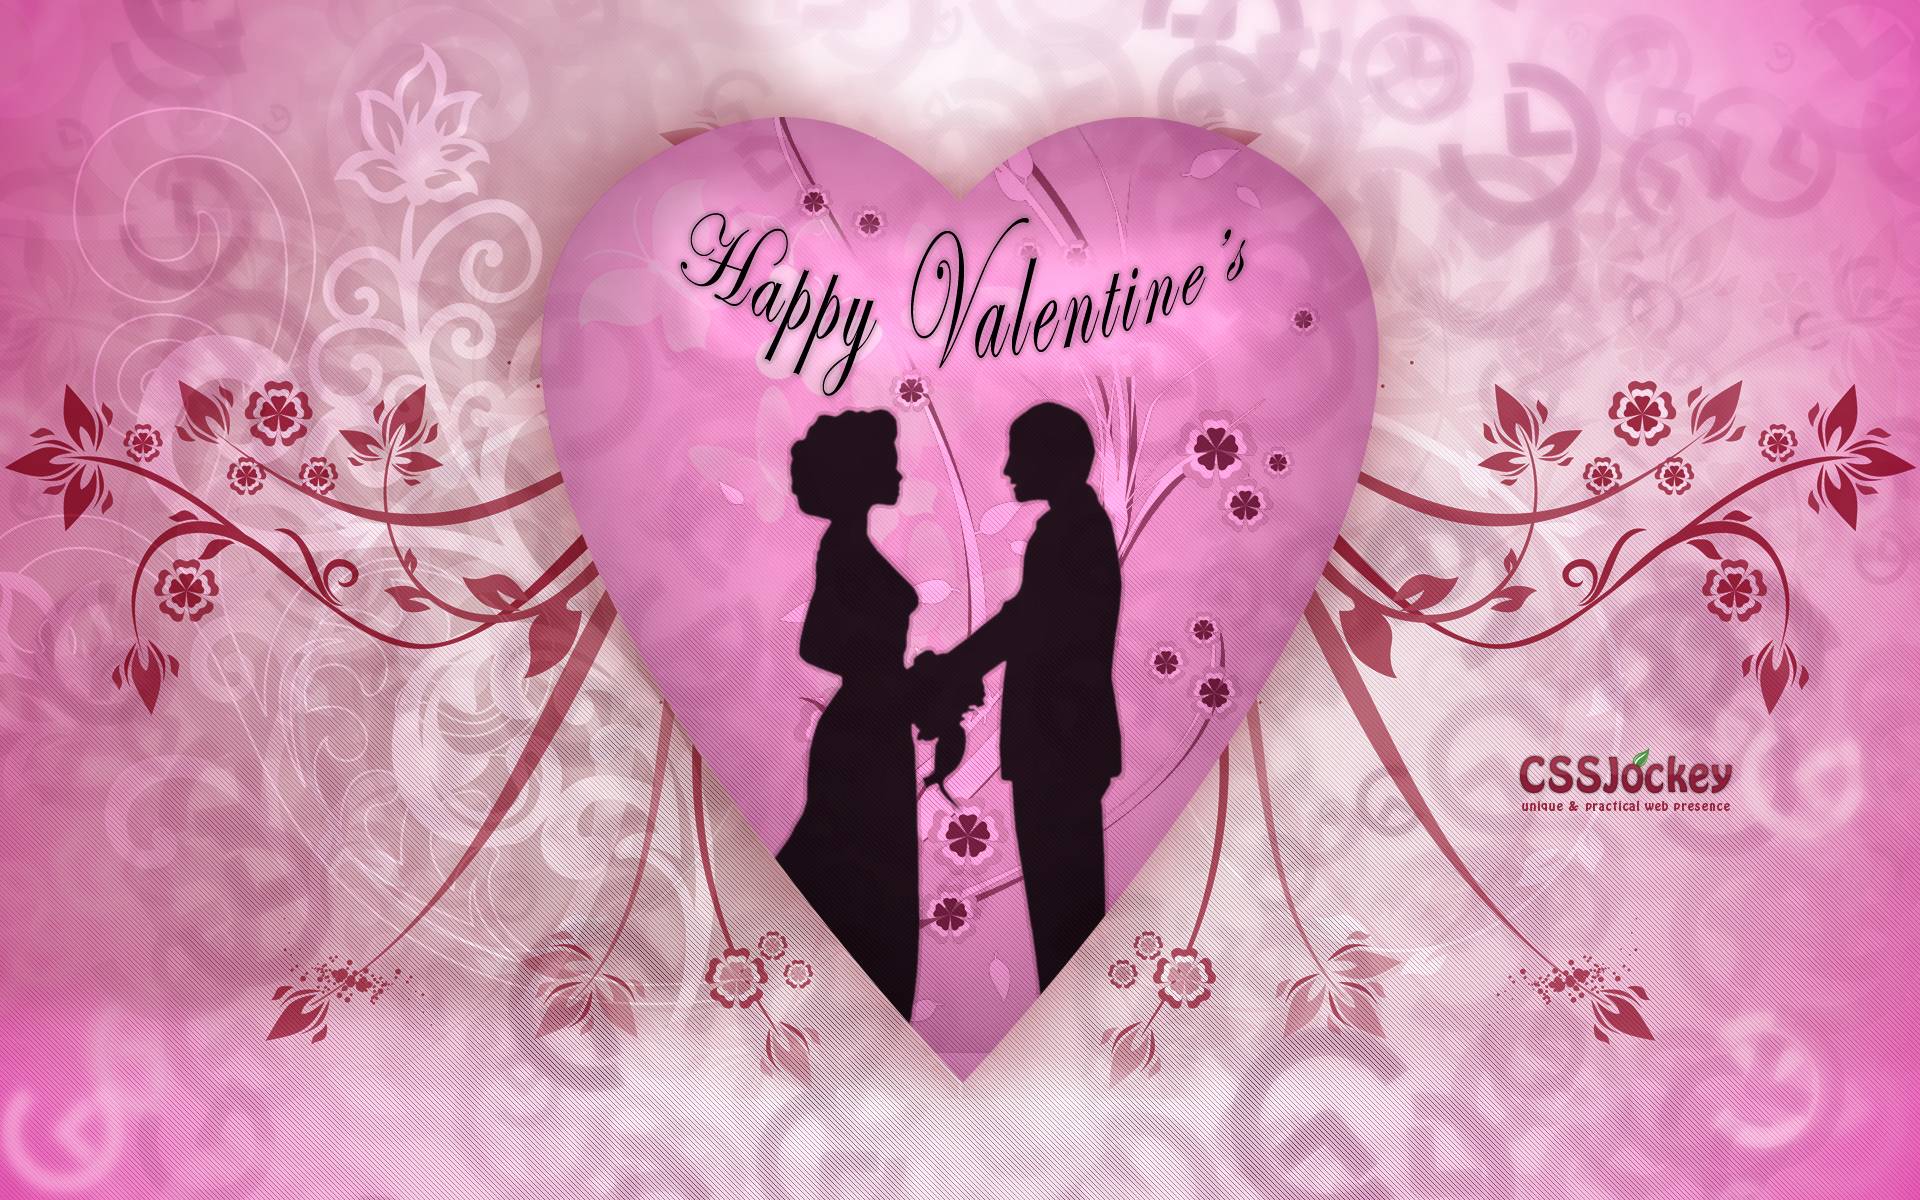 Valentines Day Wallpaper HD. Zem Wallpaper Is The Best Place